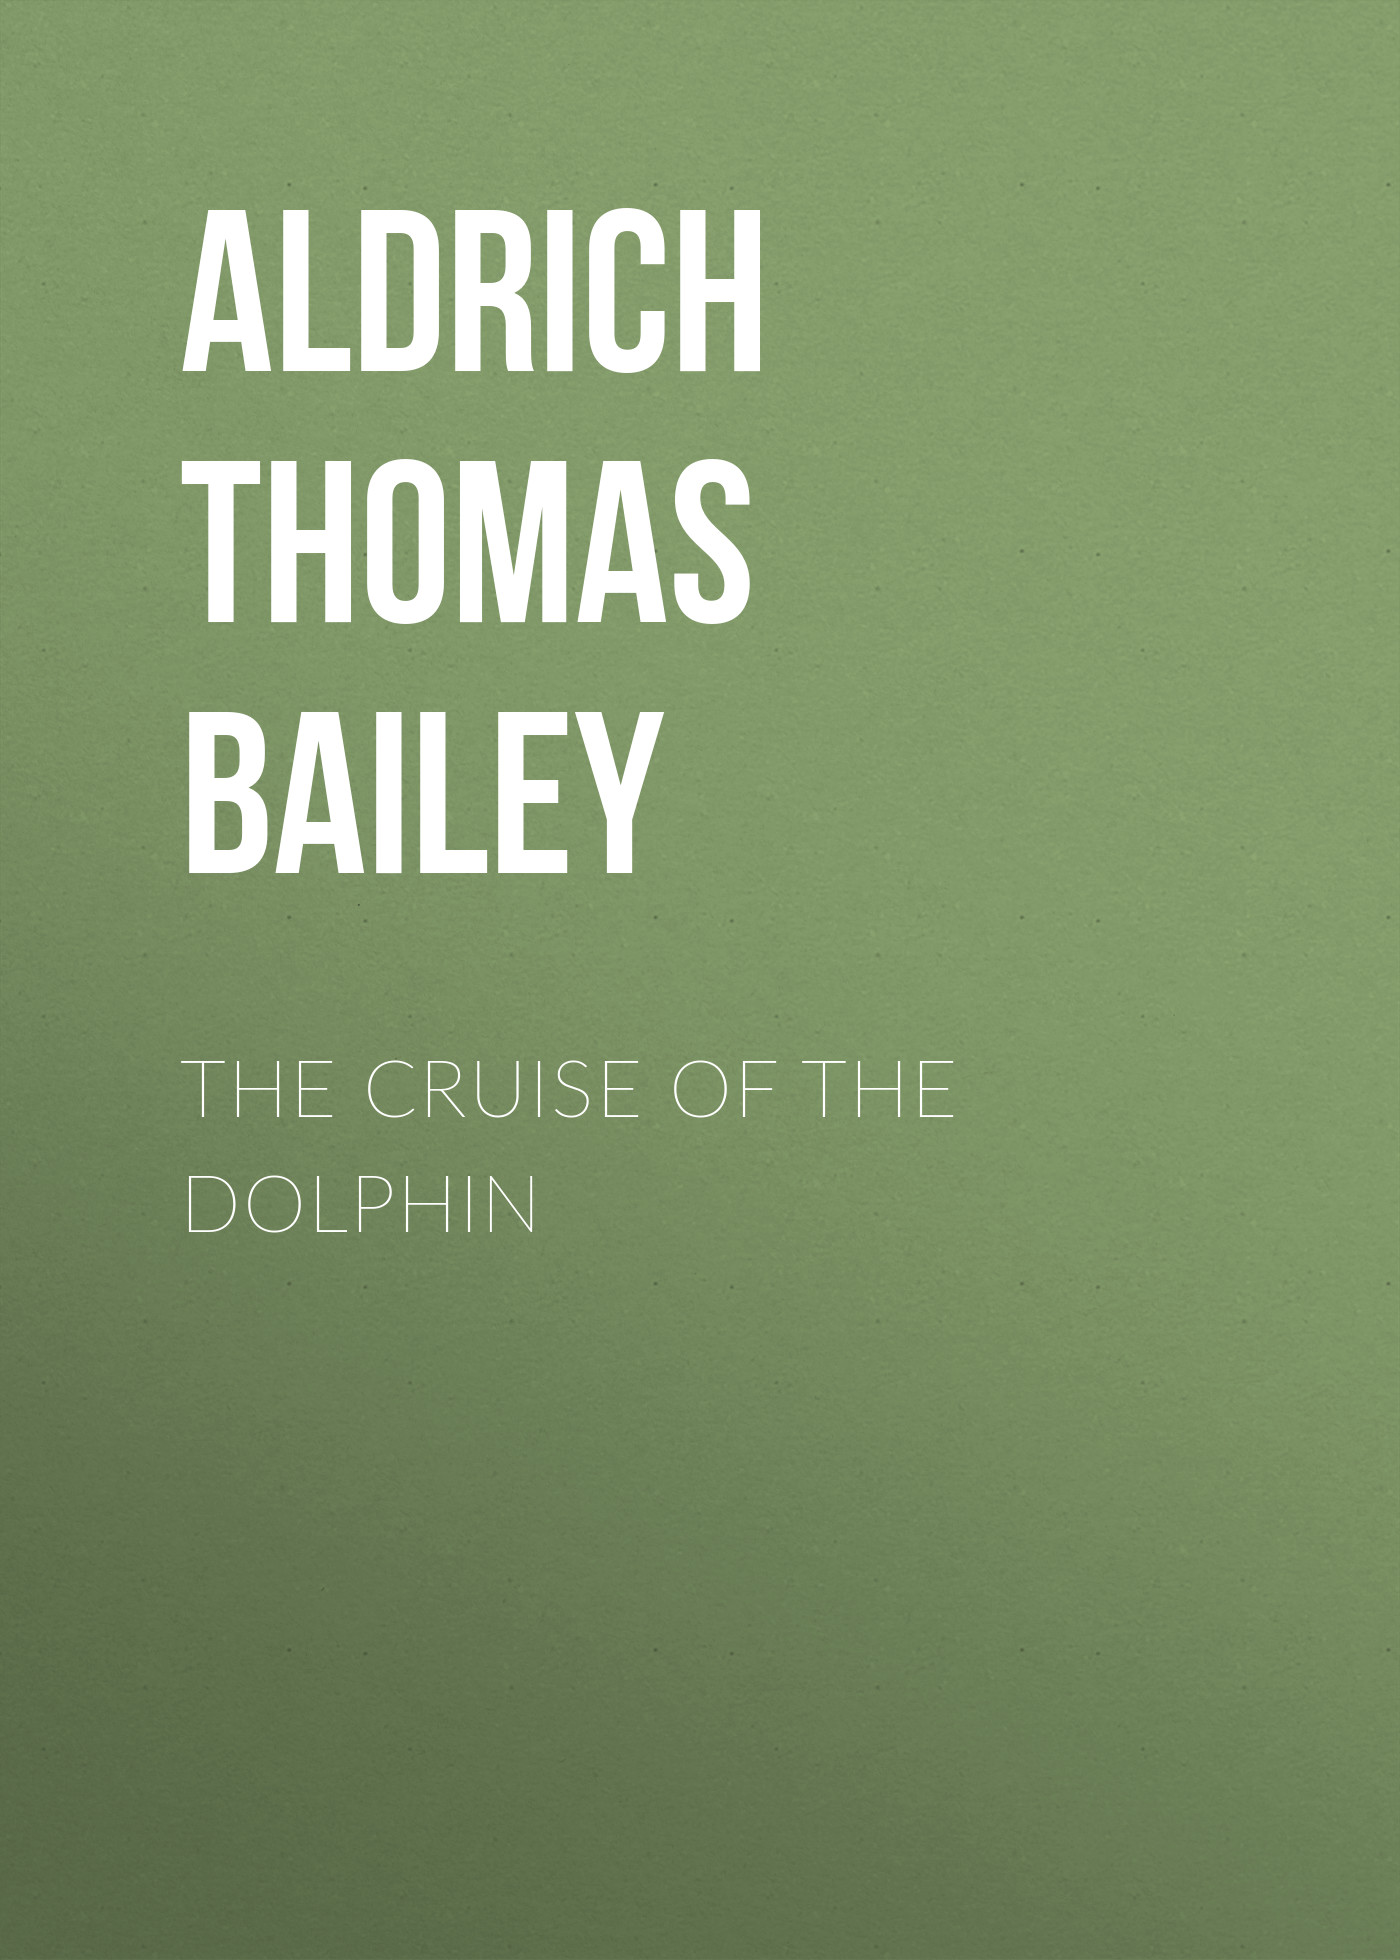 The Cruise of the Dolphin